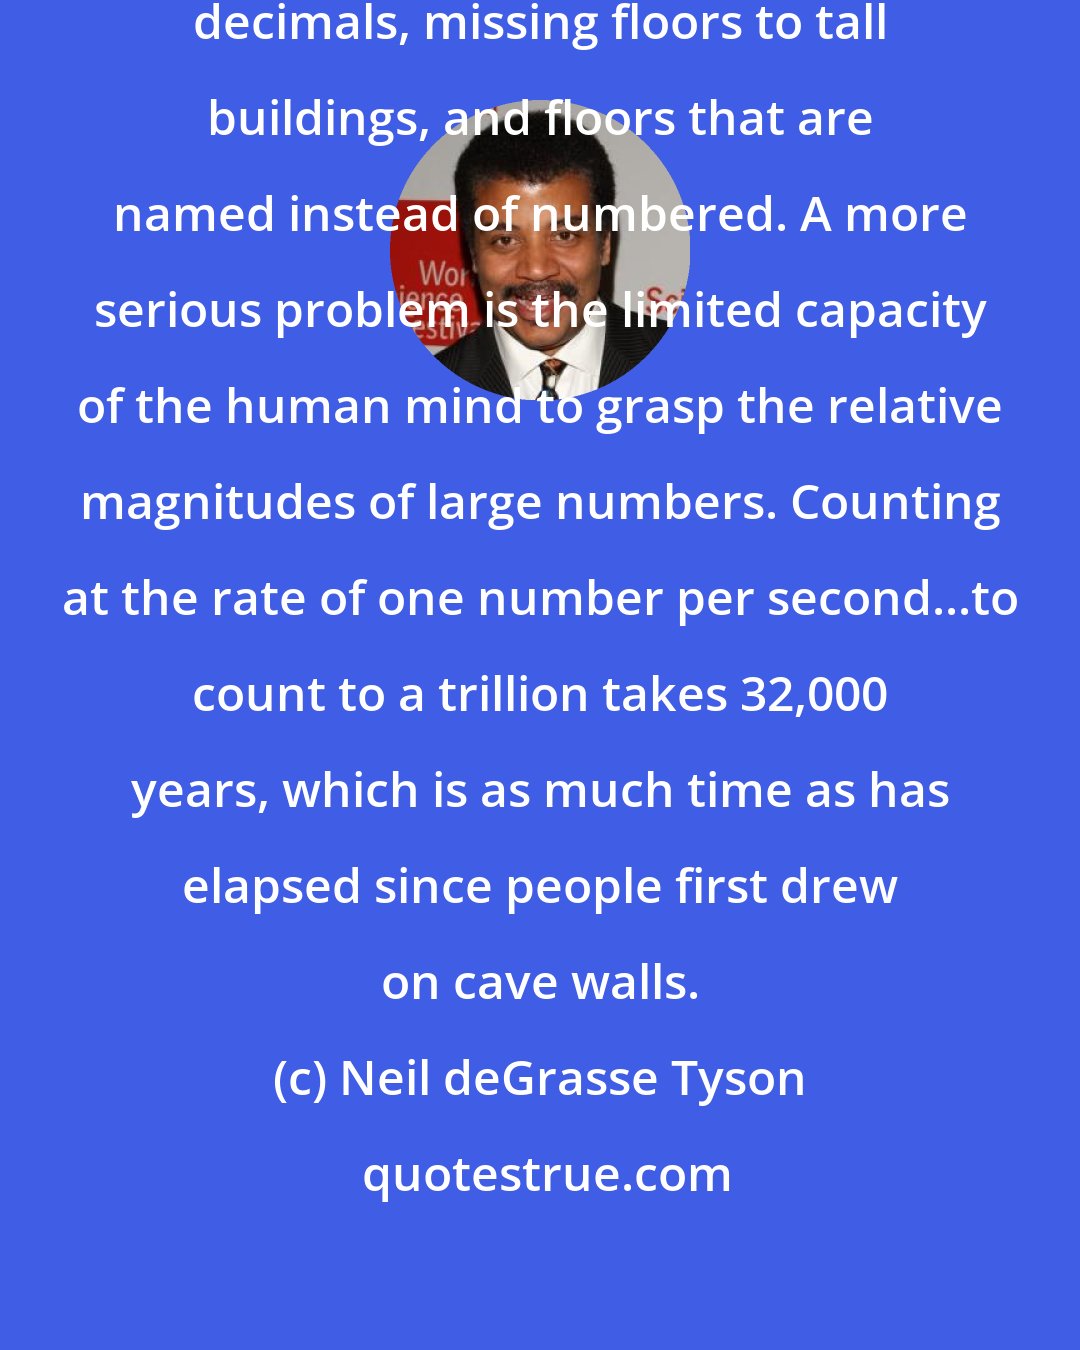 Neil deGrasse Tyson: I suppose I can live with missing decimals, missing floors to tall buildings, and floors that are named instead of numbered. A more serious problem is the limited capacity of the human mind to grasp the relative magnitudes of large numbers. Counting at the rate of one number per second...to count to a trillion takes 32,000 years, which is as much time as has elapsed since people first drew on cave walls.